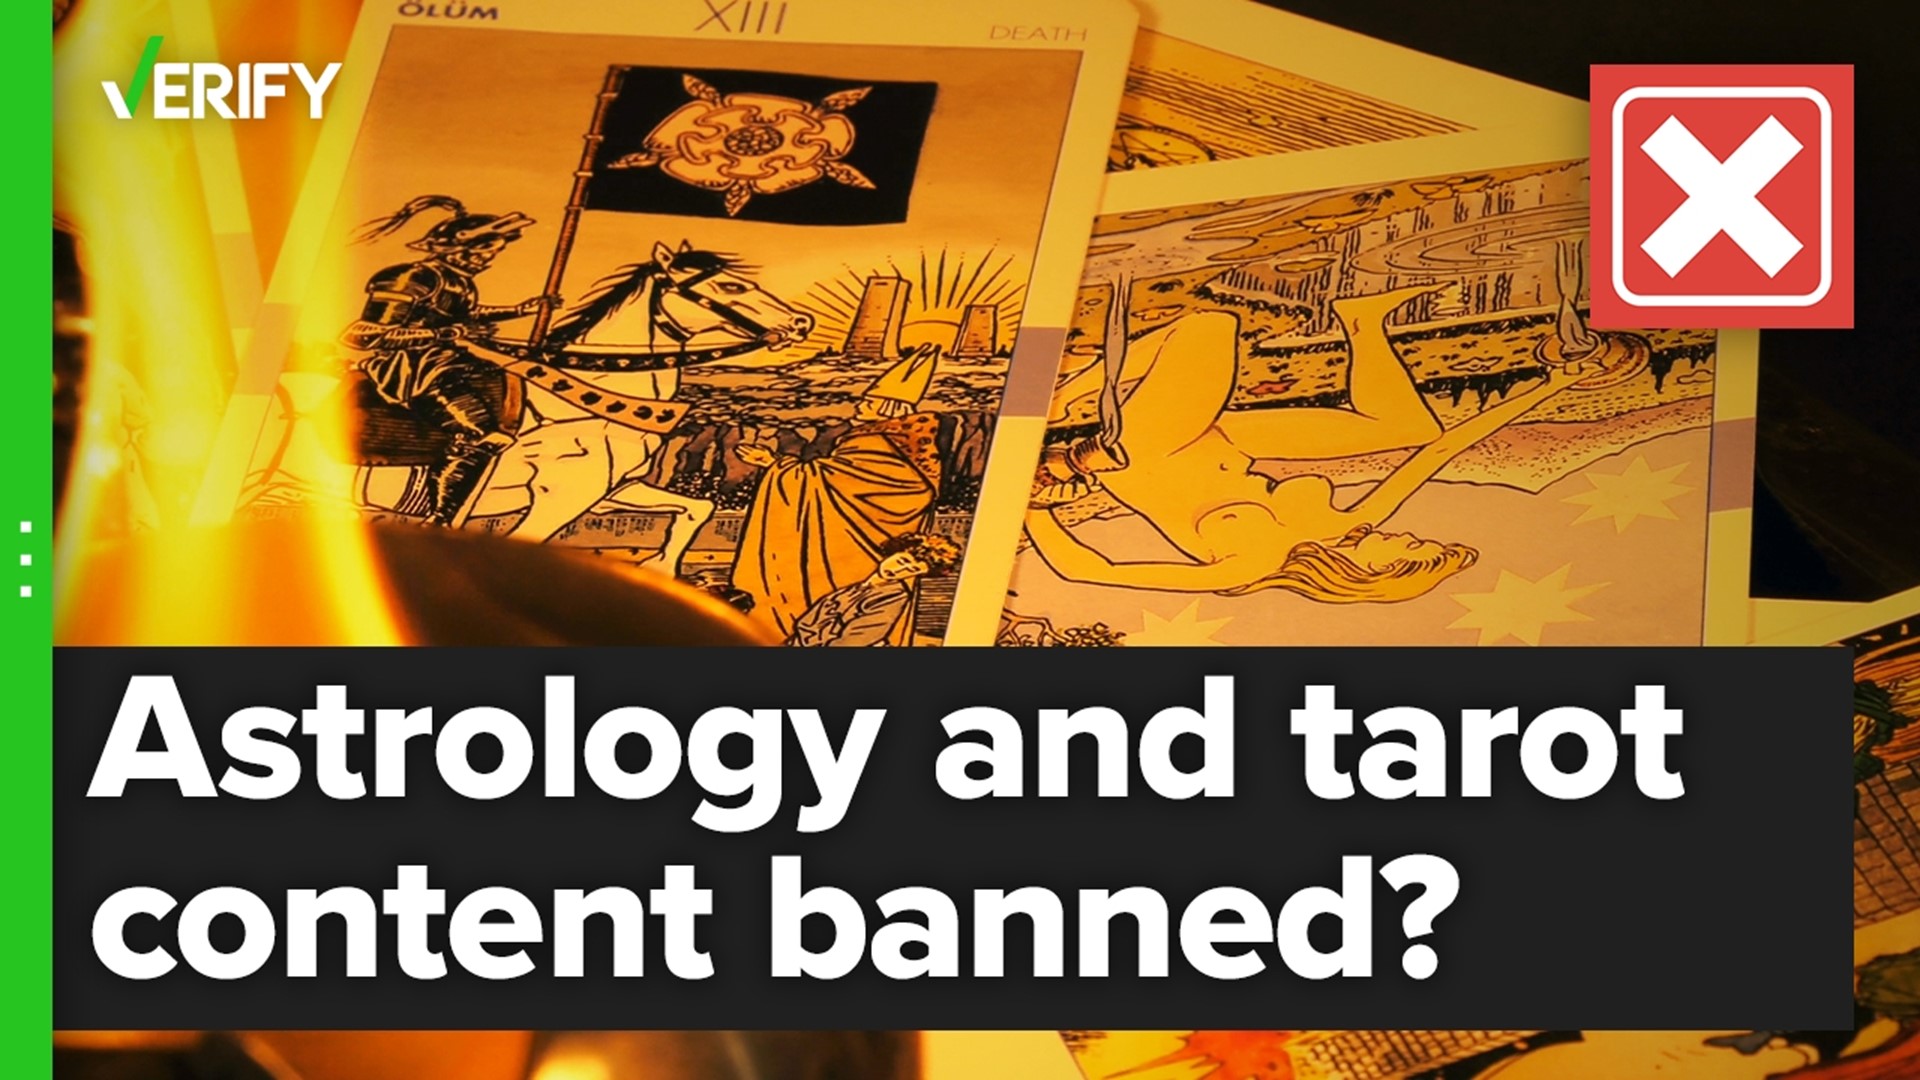 Are Facebook, Instagram and TikTok banning astrology and tarot content? The VERIFY team confirms this is false.